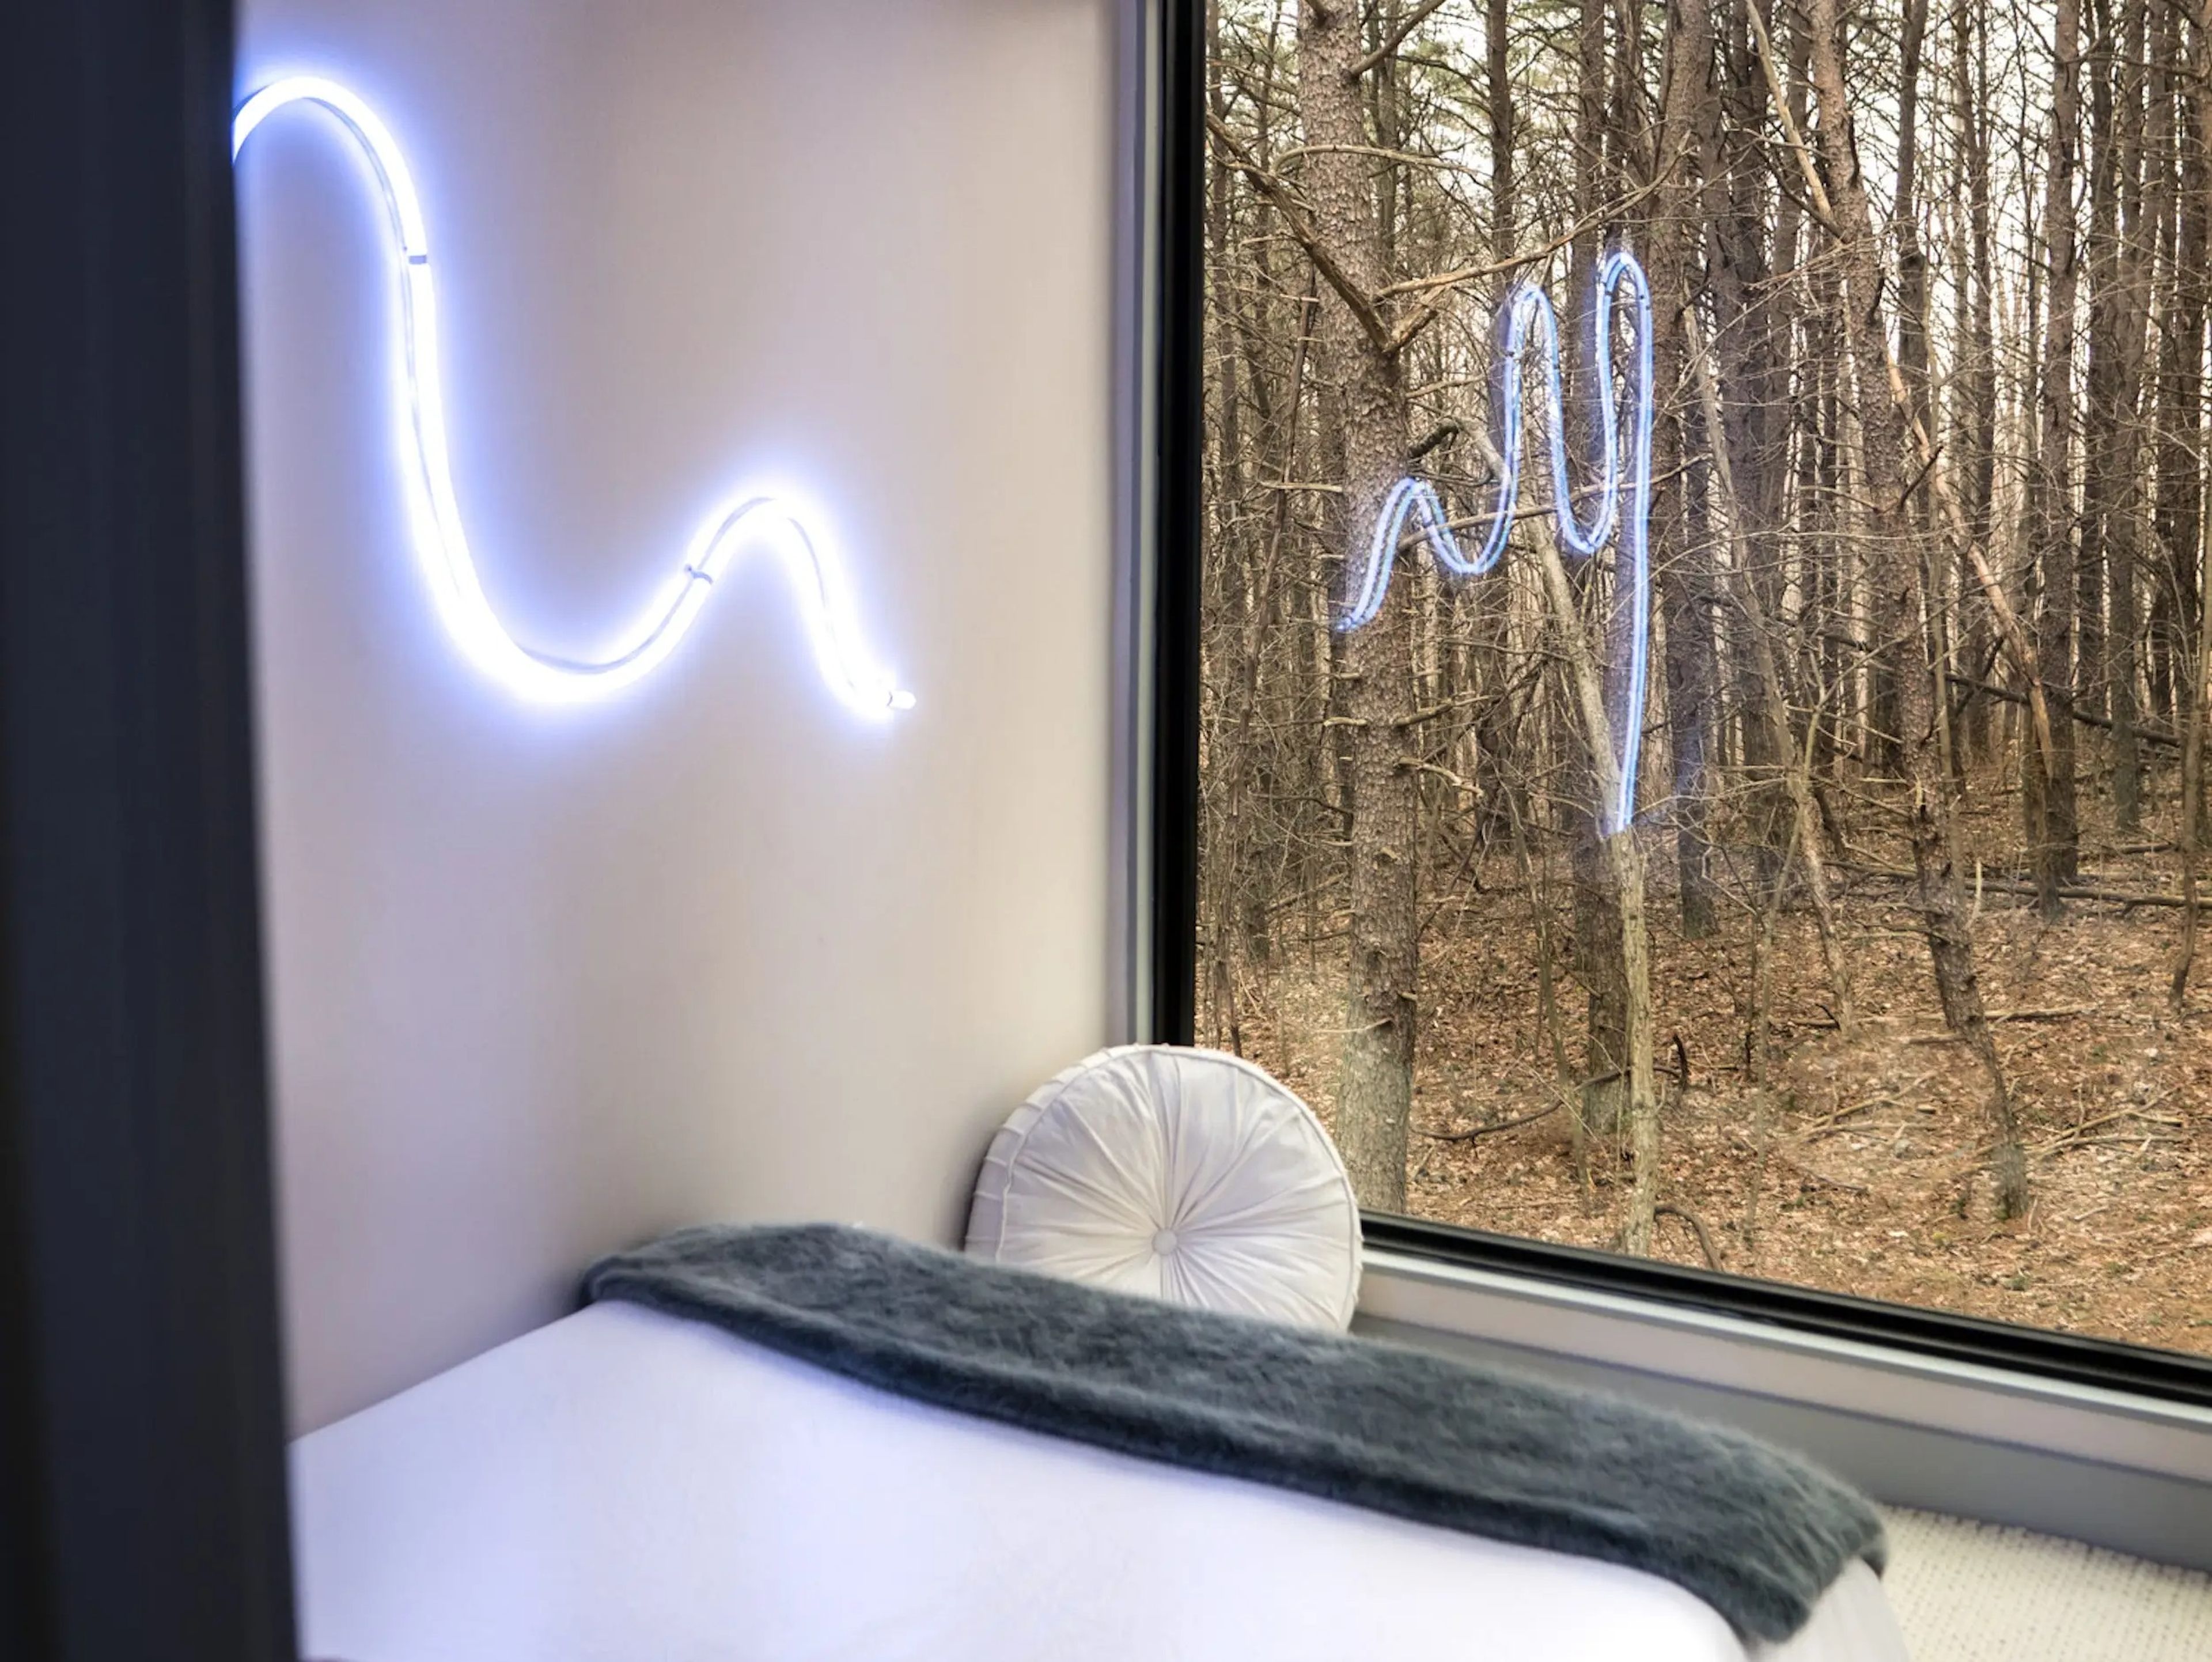 Wavy neon lights next to a bed overlooking a window of walls with views of the tree inside the OG Box, a shipping container home.